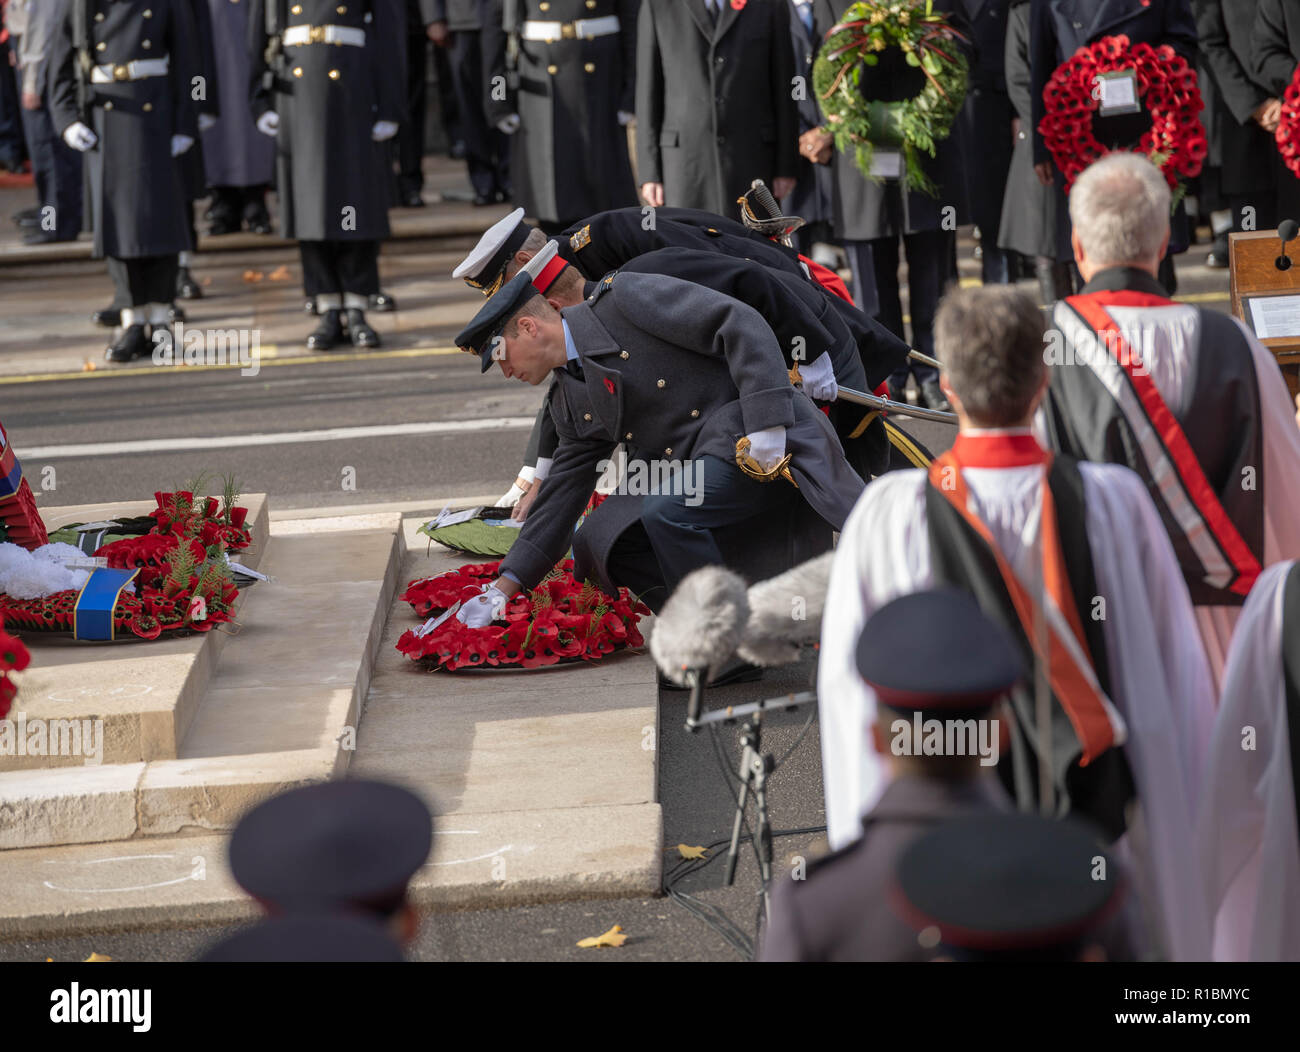 London UK, 11th November 2018  The National Service of Remembrance  at the Cenotaph London on Remembrance Sunday in the presence of HM The Queen, the Prime Minster, Theresa May, former prime ministers, senior government ministers  and representatives of the Commenwealth  HRH Prince William, HRH Prince Harry (with berad) and HRH Prince Andrew Credit Ian Davidson/Alamy Live News Stock Photo